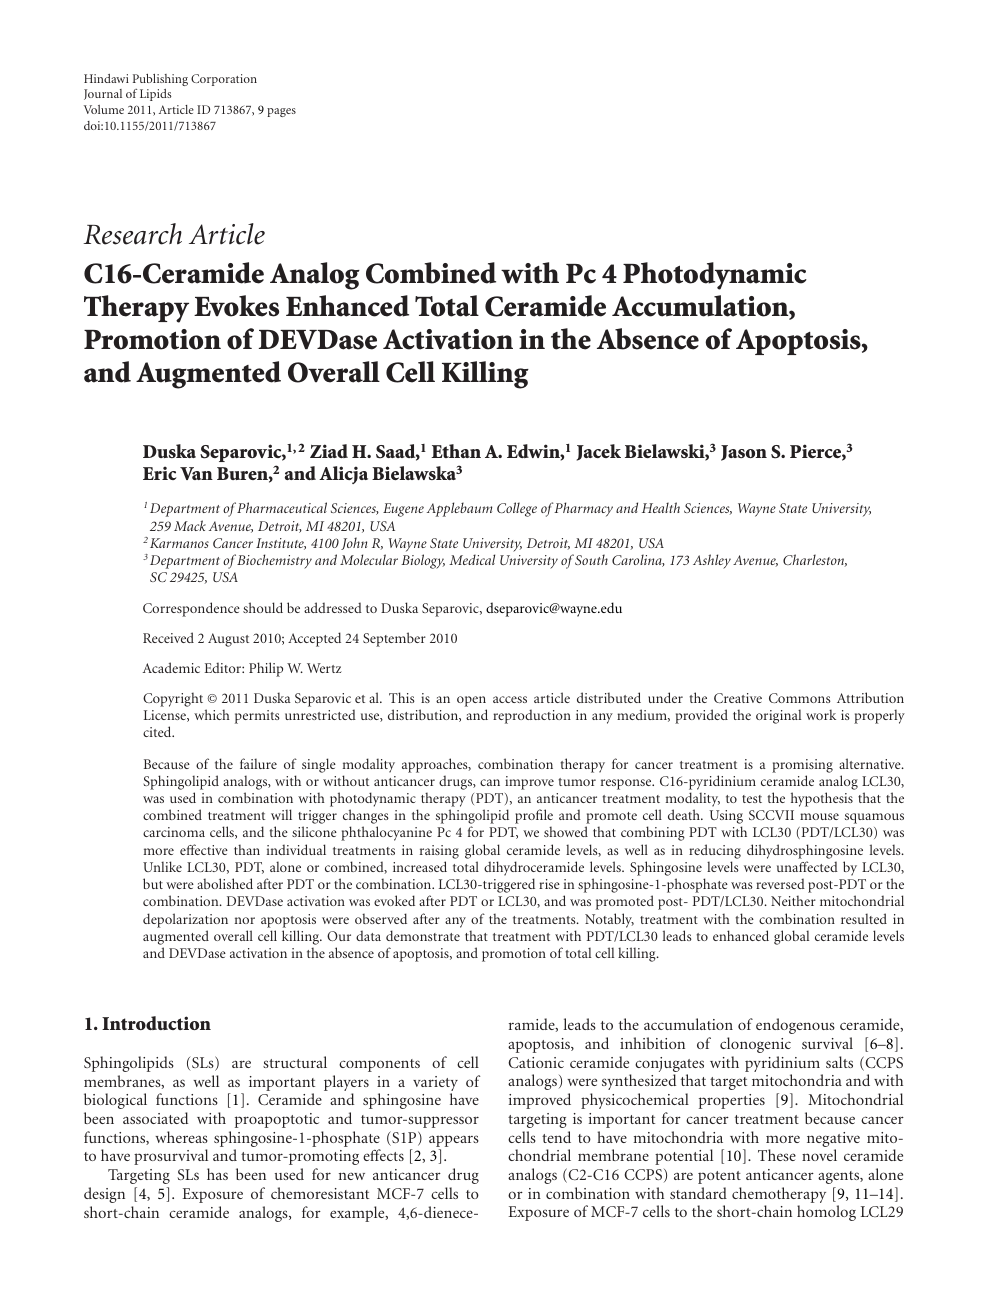 C16 Ceramide Analog Combined With Pc 4 Photodynamic Therapy Evokes Enhanced Total Ceramide Accumulation Promotion Of Devdase Activation In The Absence Of Apoptosis And Augmented Overall Cell Killing Topic Of Research Paper